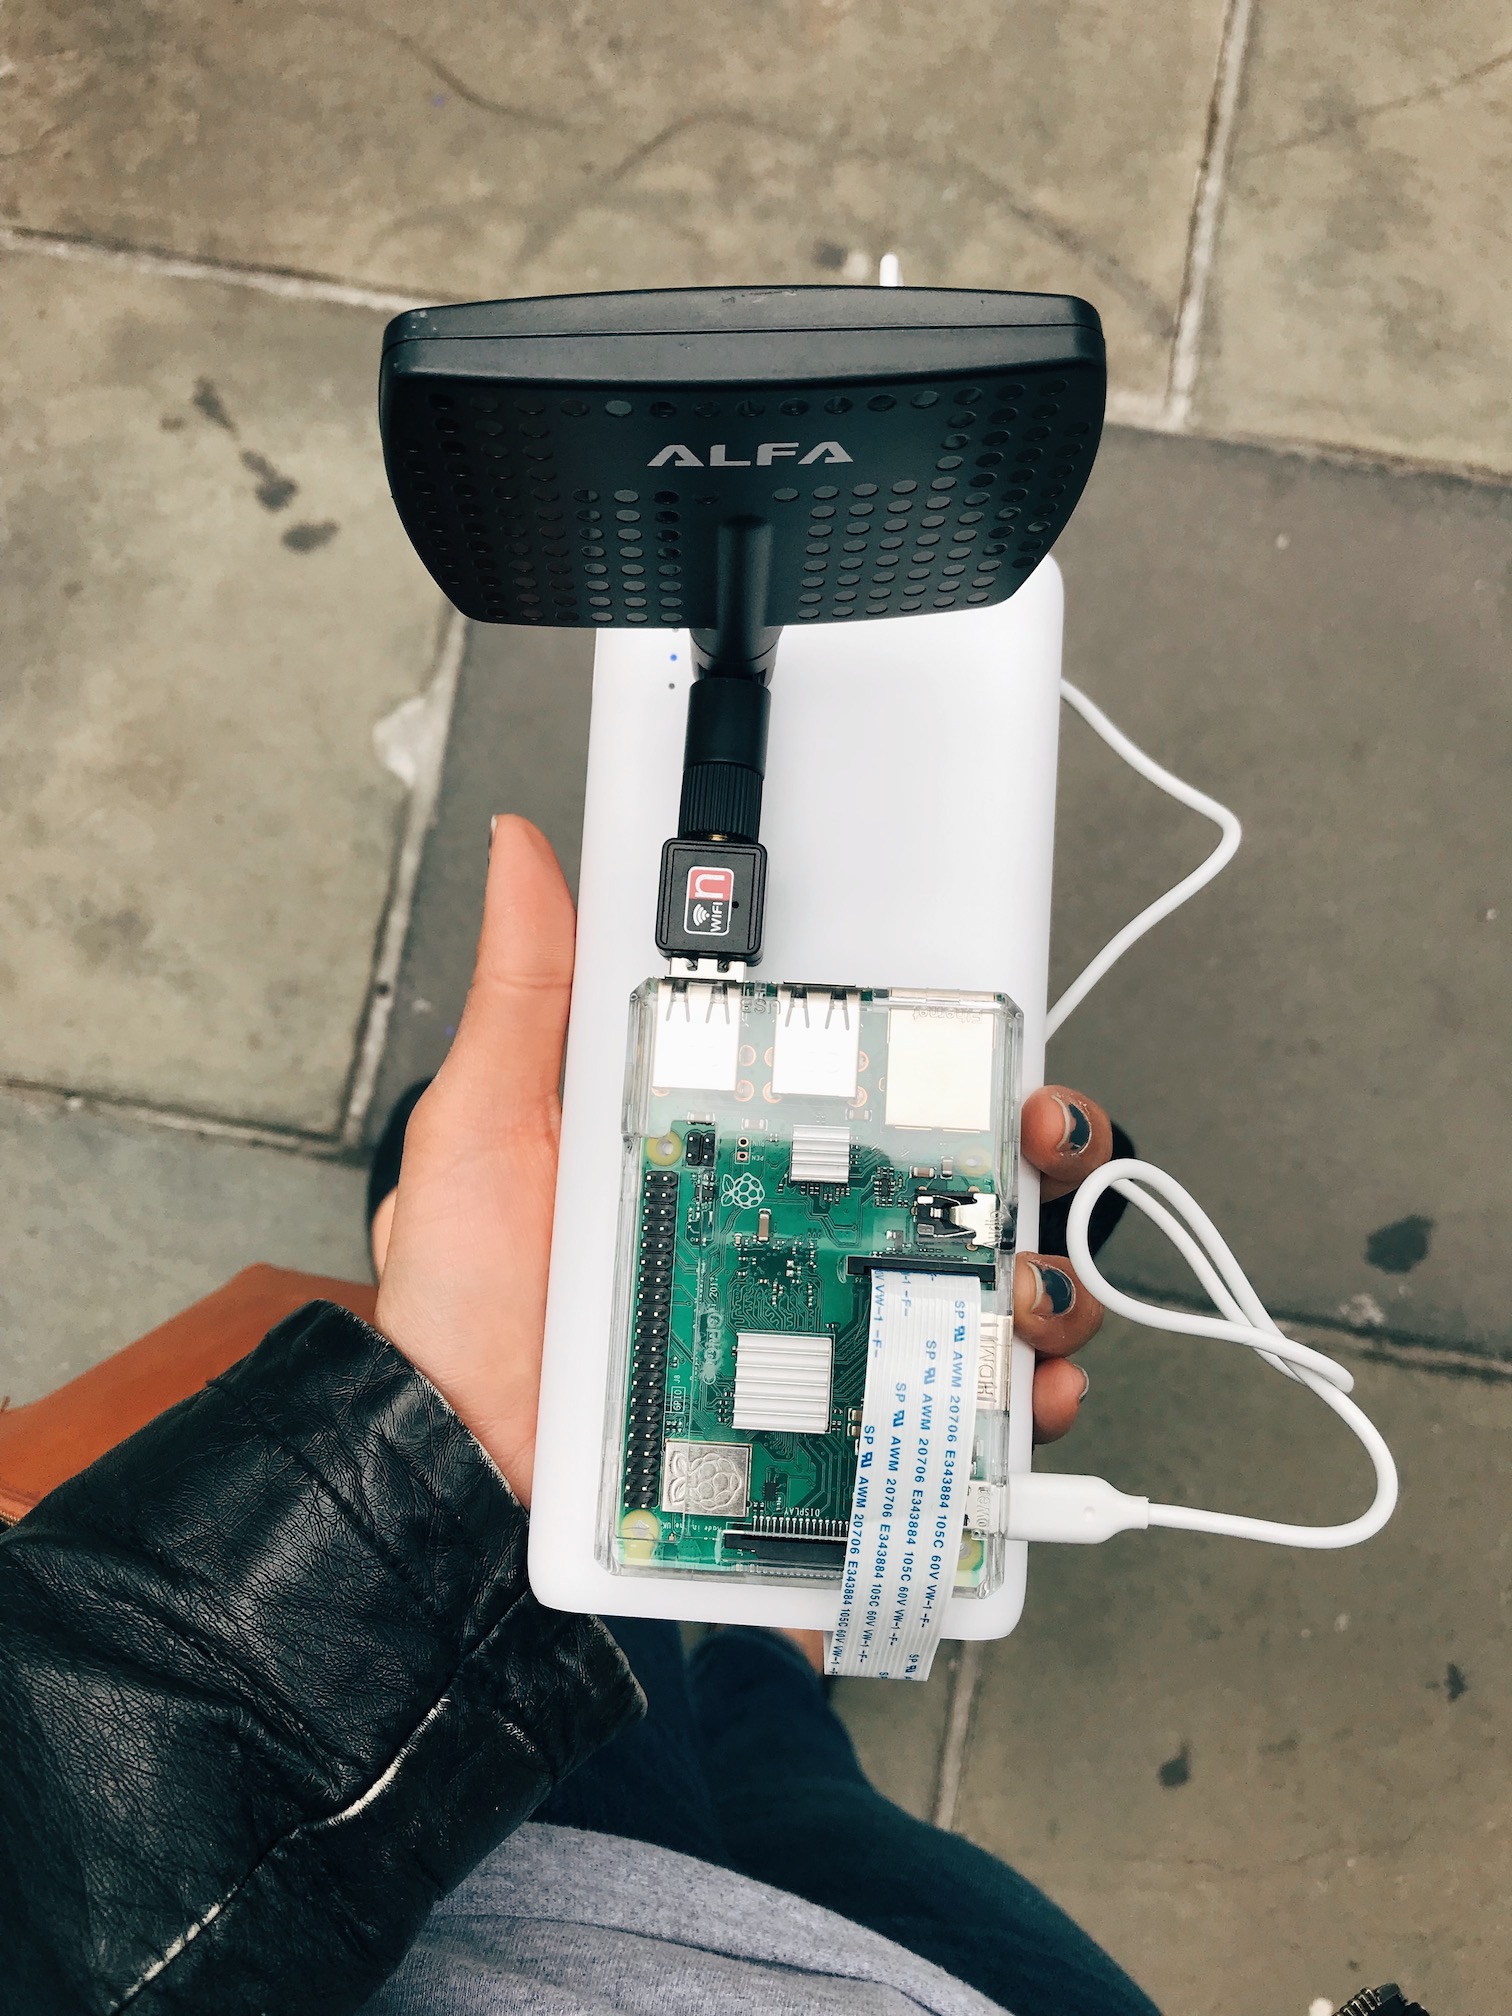 A Raspberry Pi, with attached WiFi antenna and portable battery pack.